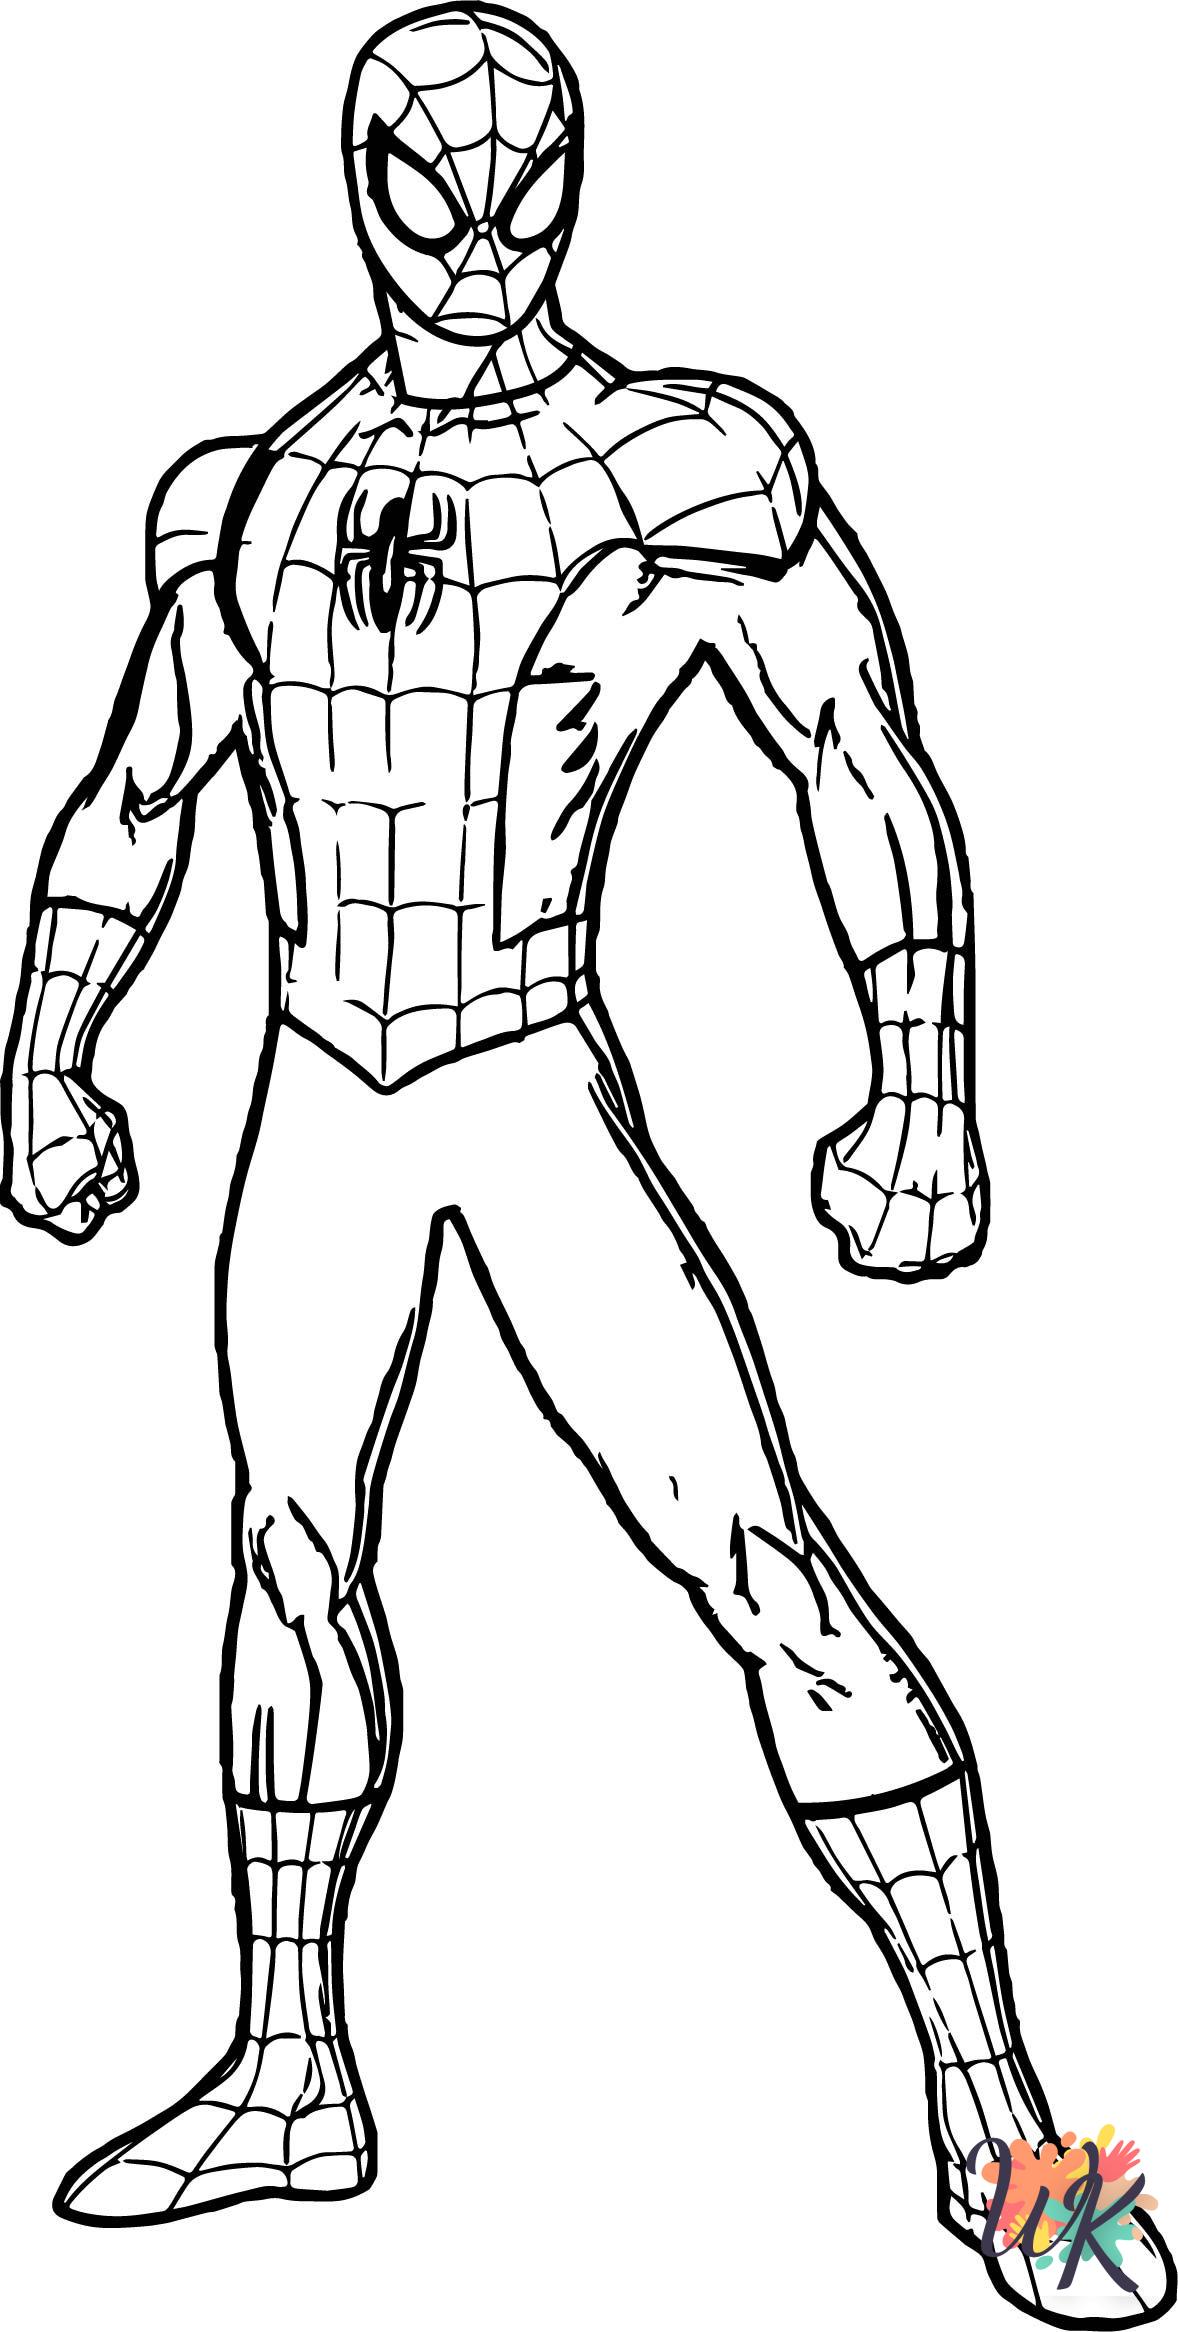 Spiderman coloring pages for adults